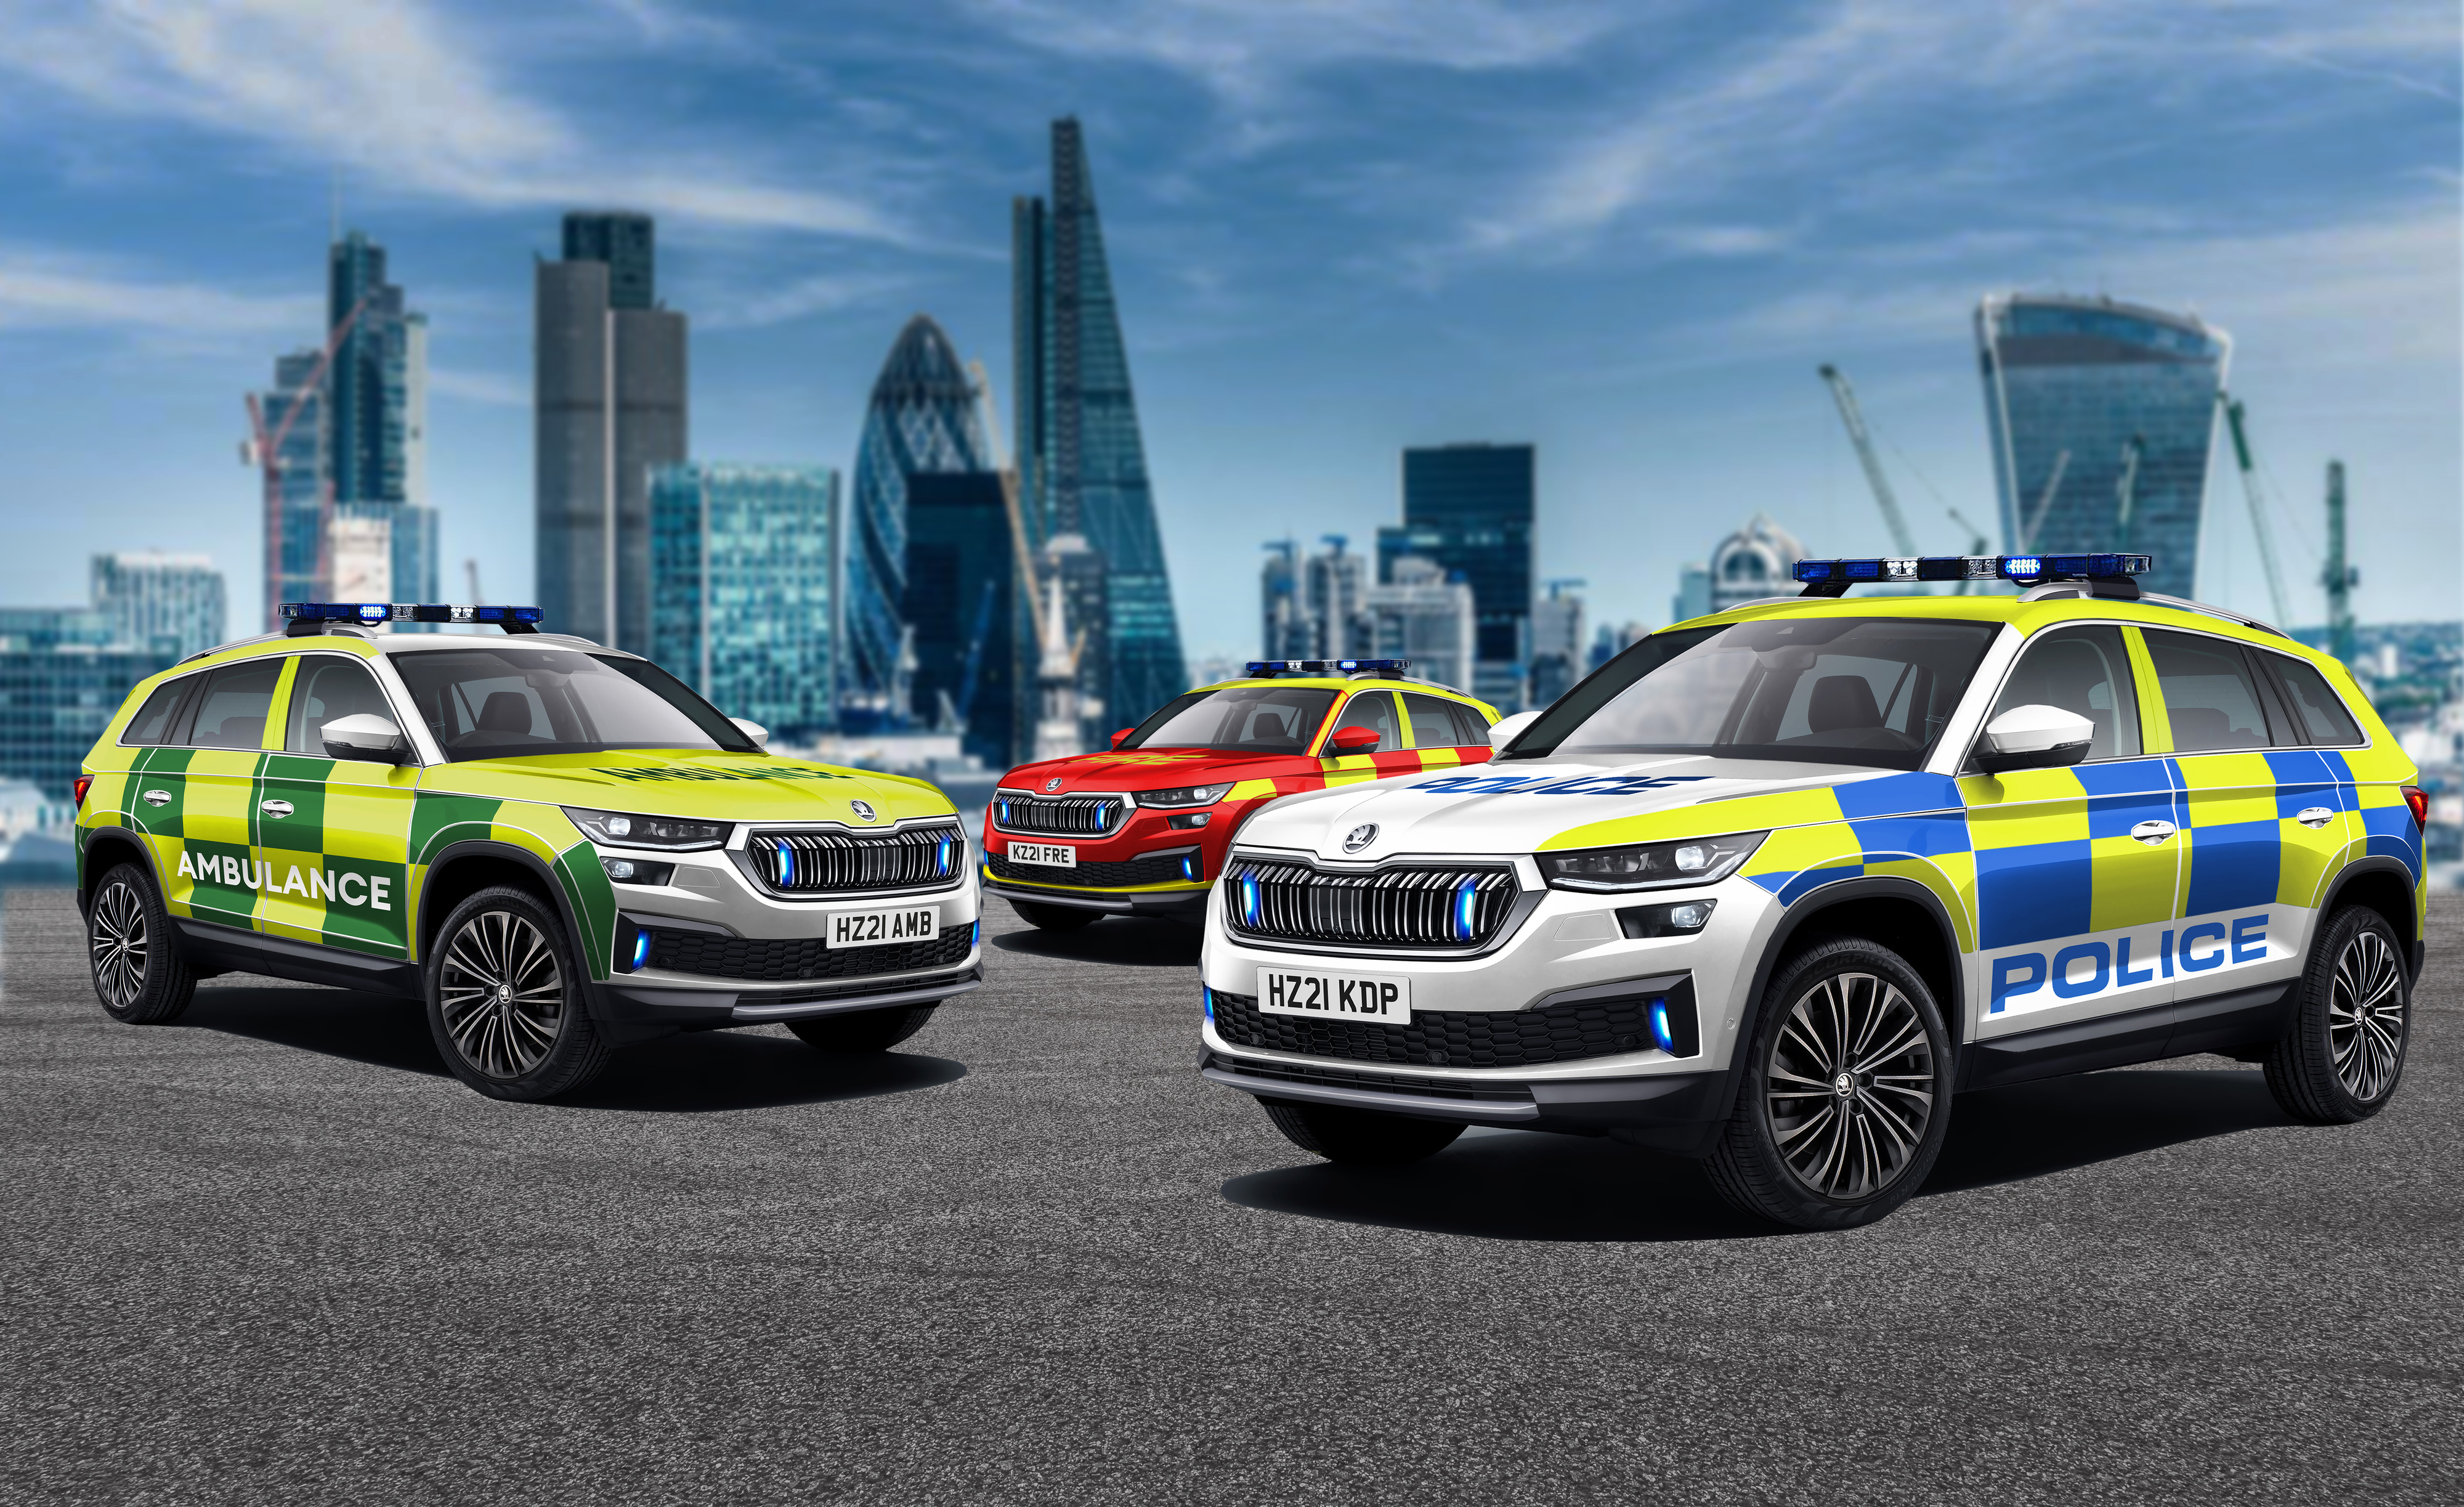 Skoda Discounts for NHS, Police, Military & More